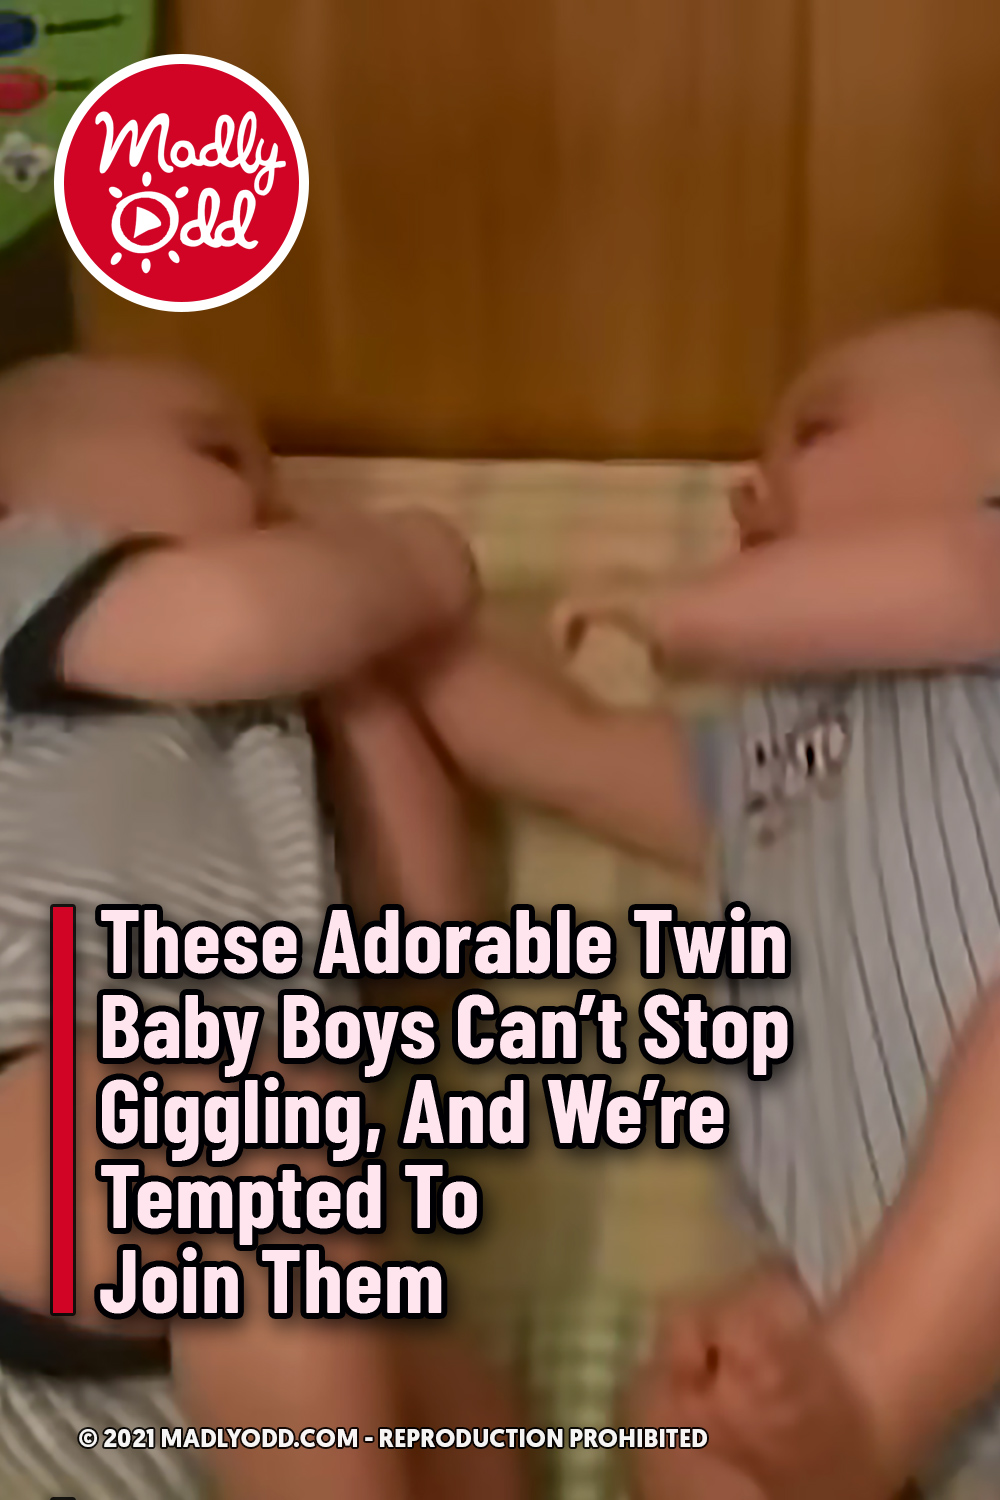 These Adorable Twin Baby Boys Can’t Stop Giggling, And We’re Tempted To Join Them